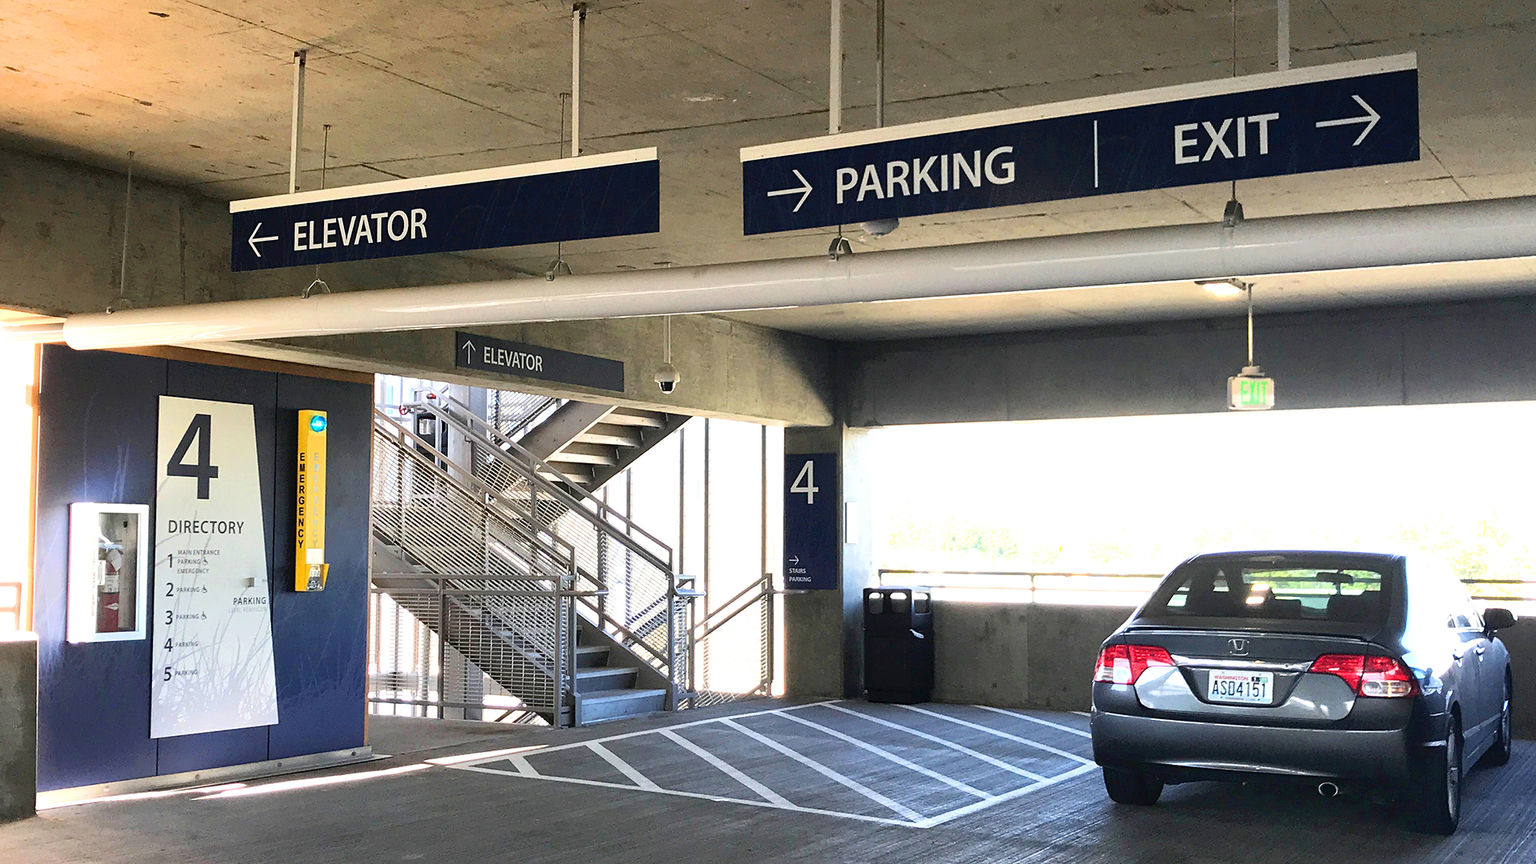 Vehicular wayfinding and parking signage in a parking facility adjacent to an elevator and parked car